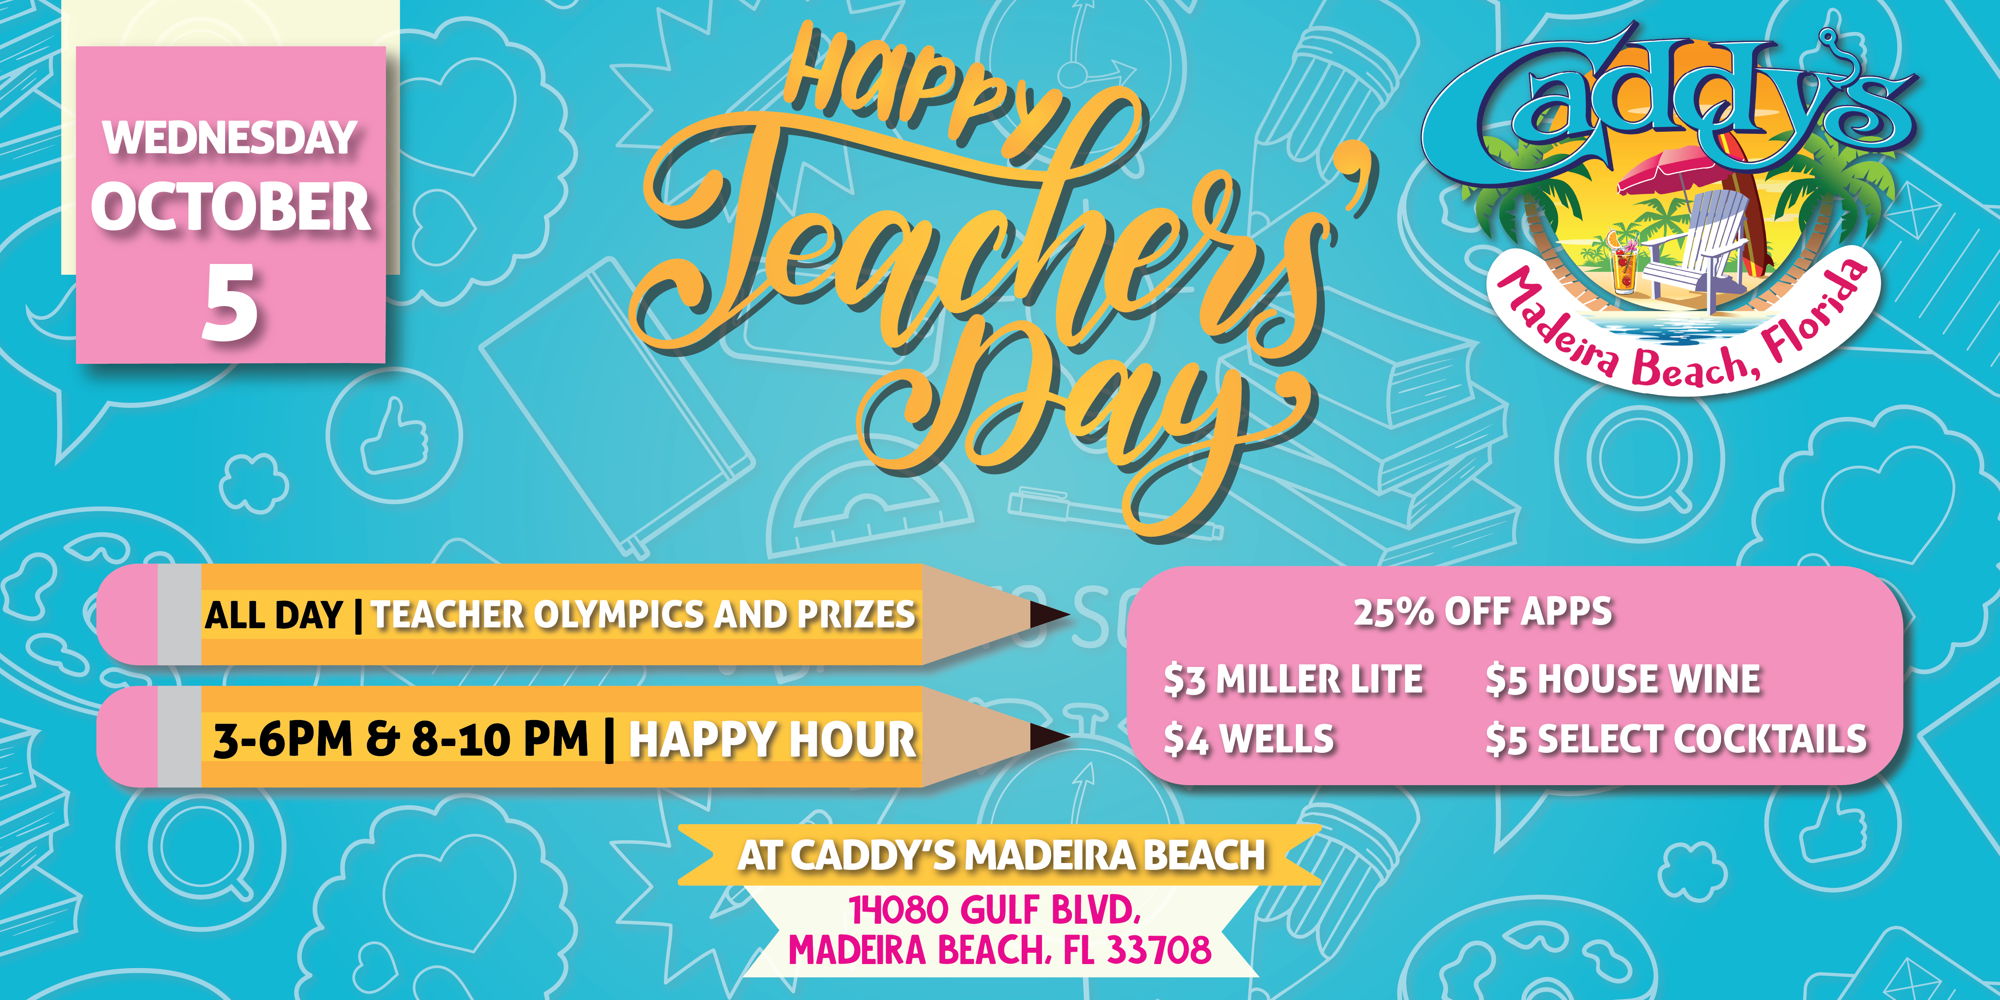 Happy Teachers’ Day! promotional image